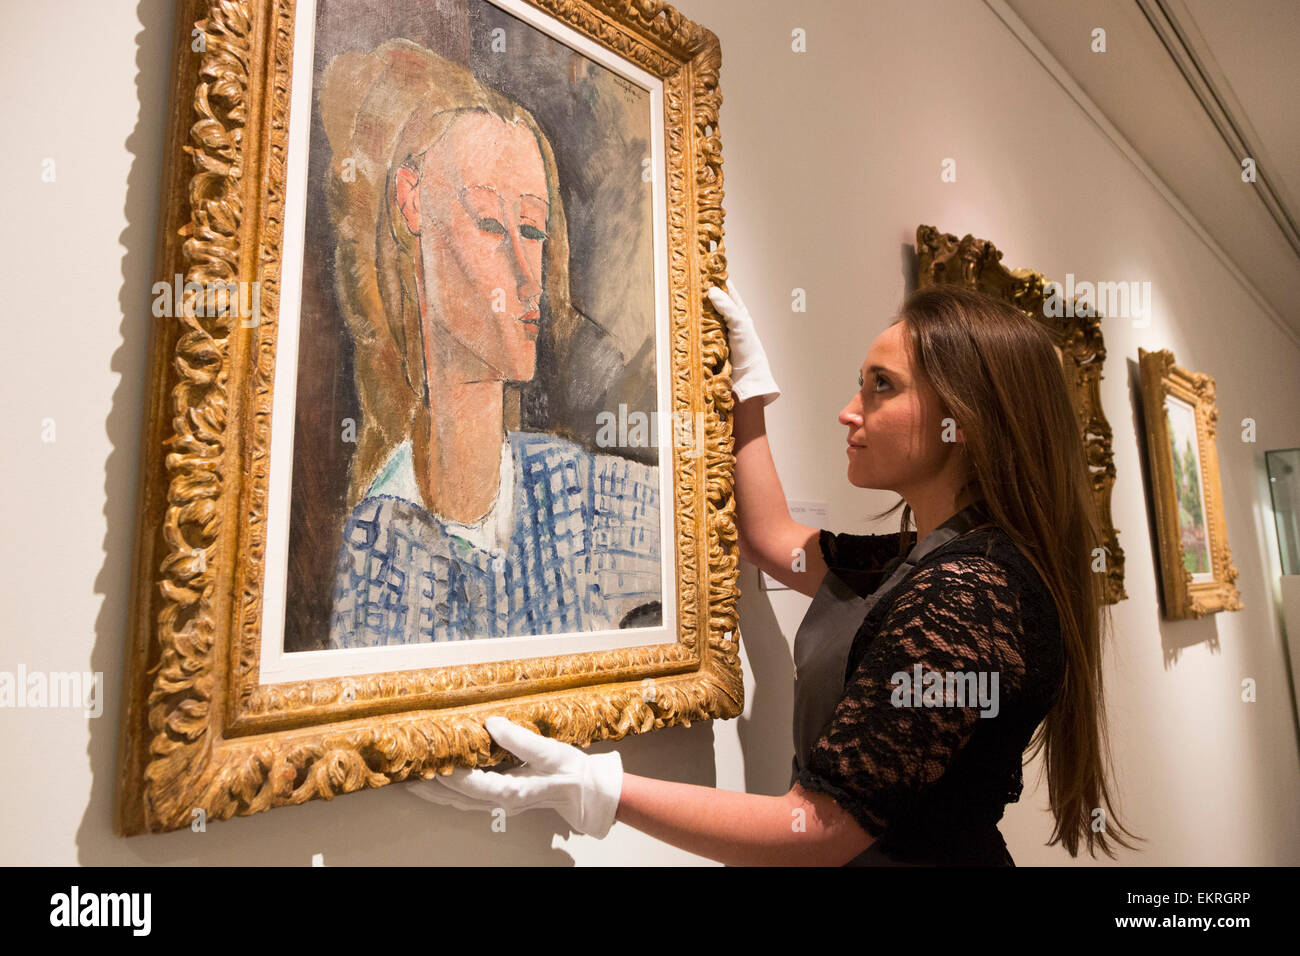 London, UK. 13 April 2015. A Christie's employee handles the Amedeo Modigliani painting Portrait de Béatrice Hastings, 1916 (estimate $7-10million) from the Collection of John C. Whitehead. Christie's showcases a selection of almost fifty works from the spring sales in May in New York of Impressionist, Modern, Post-War And Contemporary Art. Most works will be on view to the public until 15 April at Christie’s King Street, London. Photo: ukartpics/Alamy Live News Stock Photo